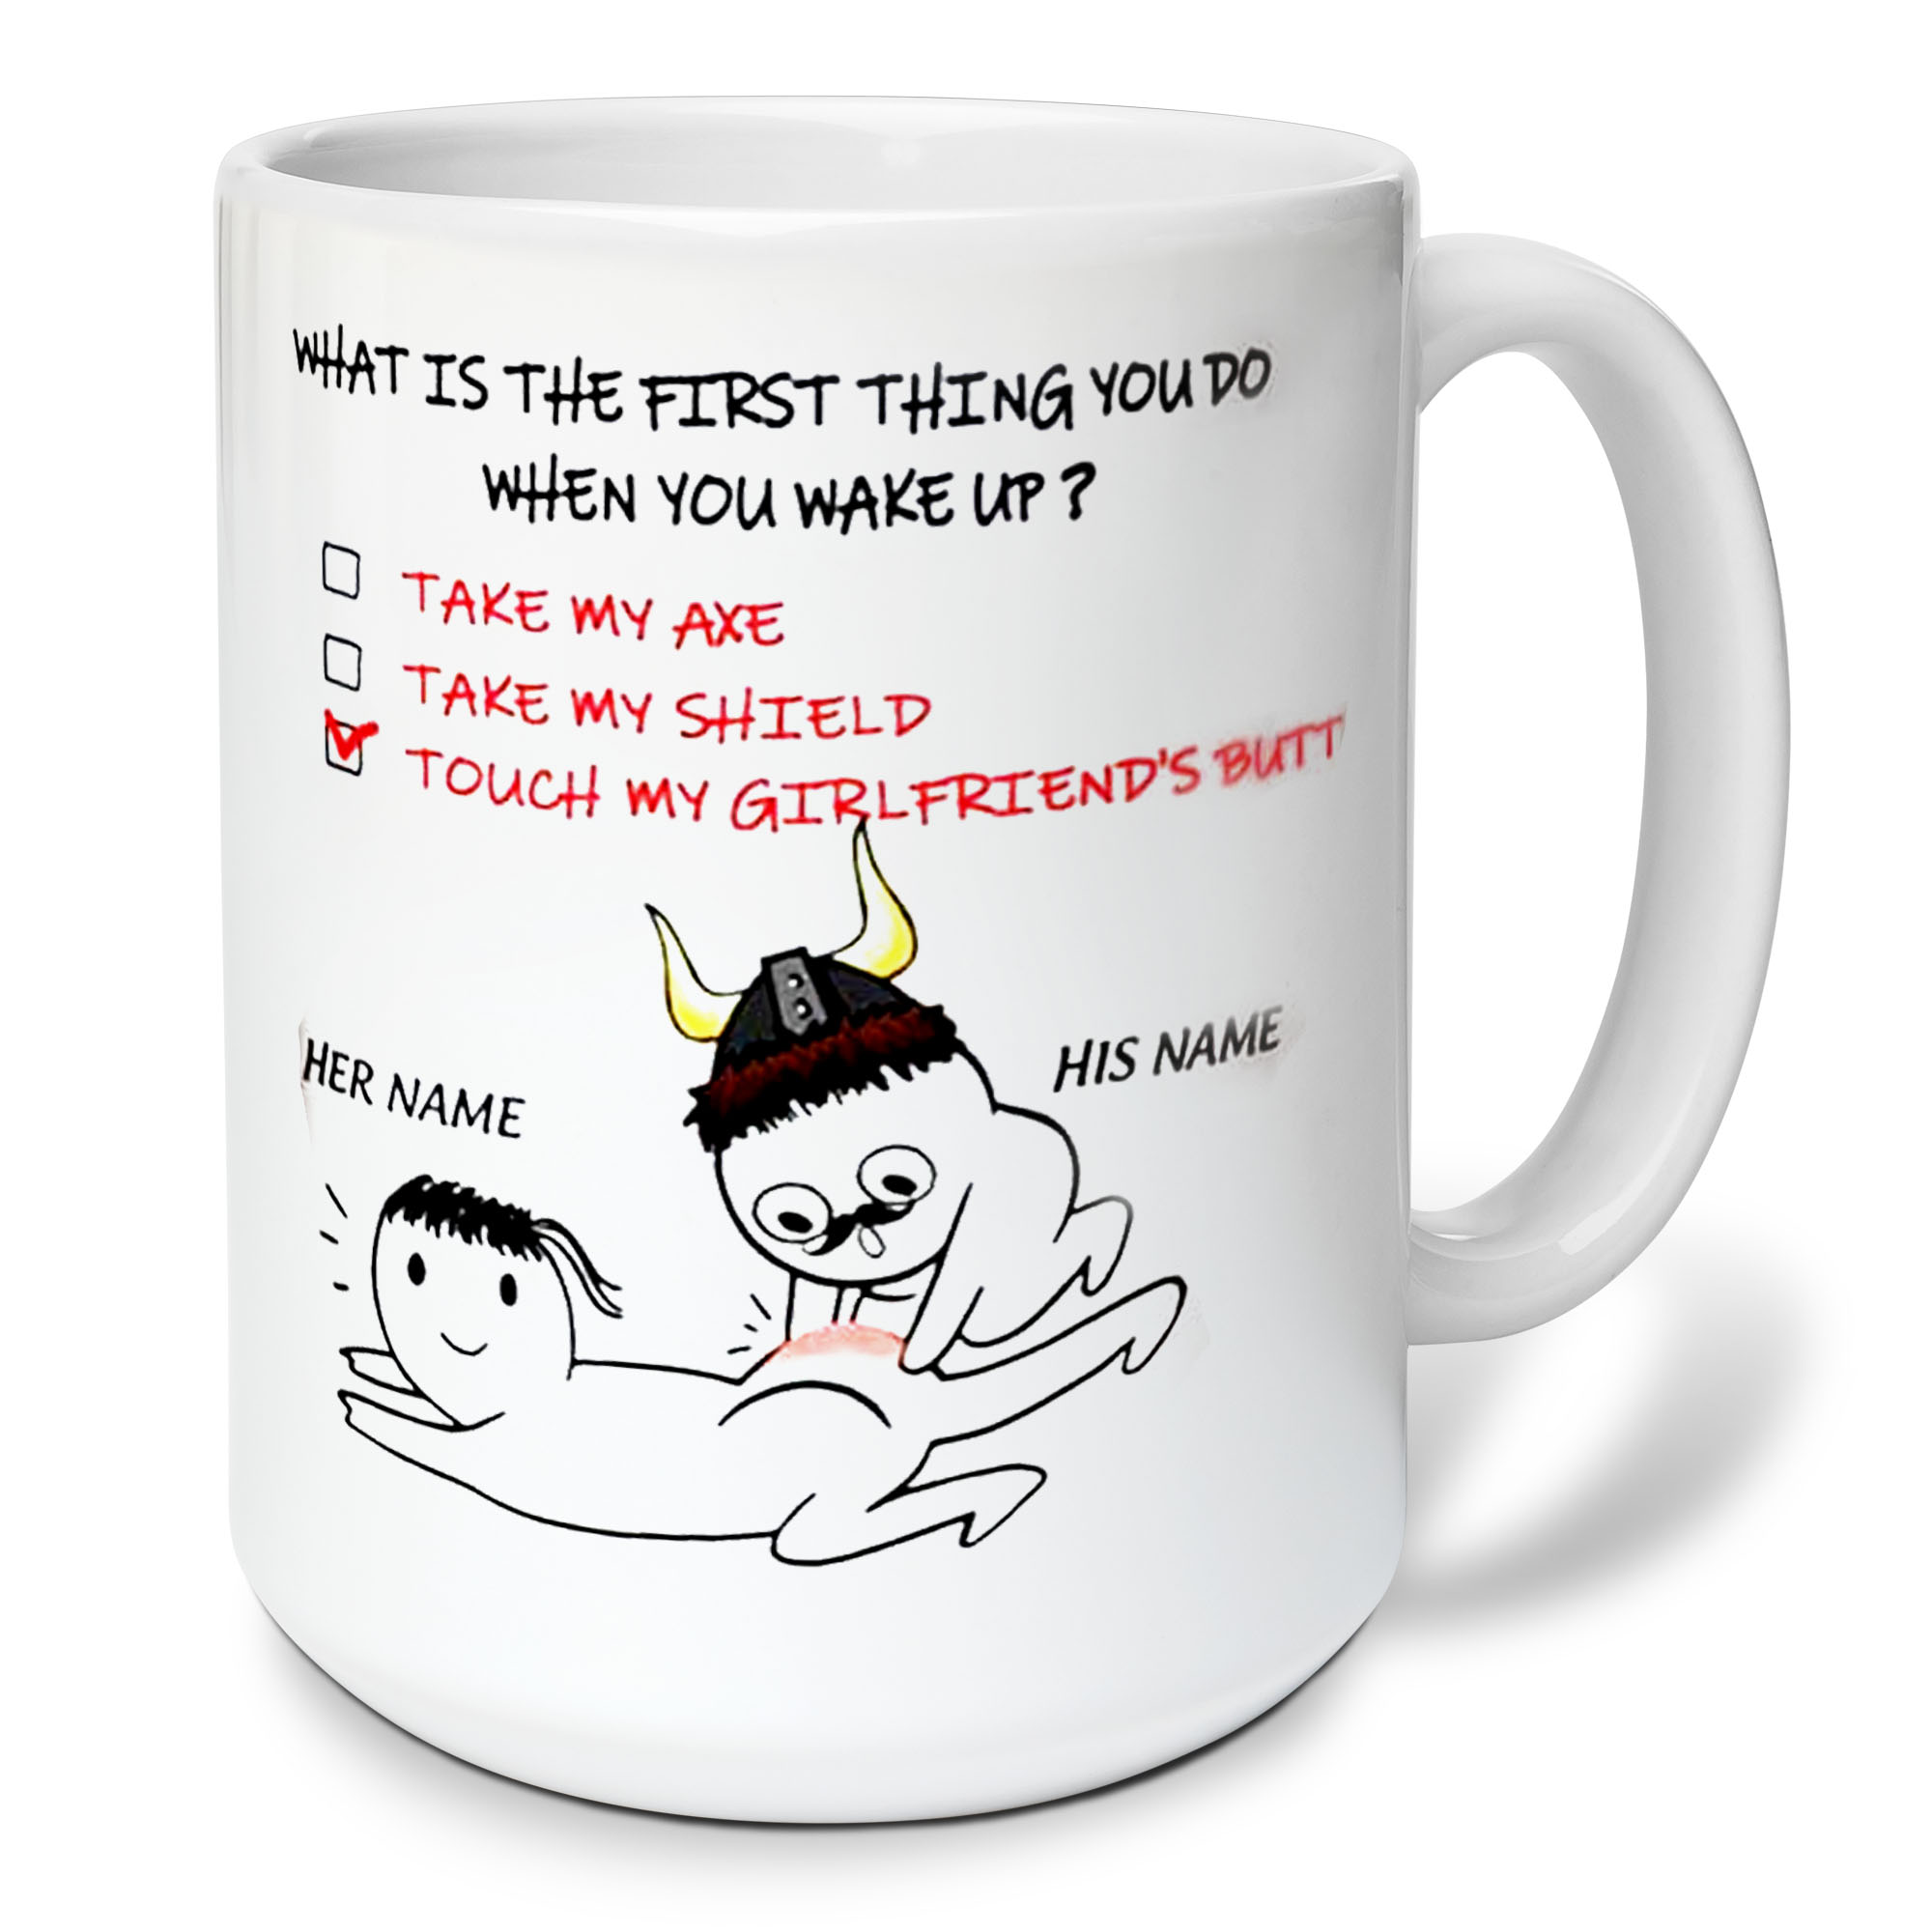 Funny Gifts For Girlfriend Birthday - Funny Gifts Ideas - 15 Oz White Cup -  Ewe Is Not Fat Ewe Is Fluffy